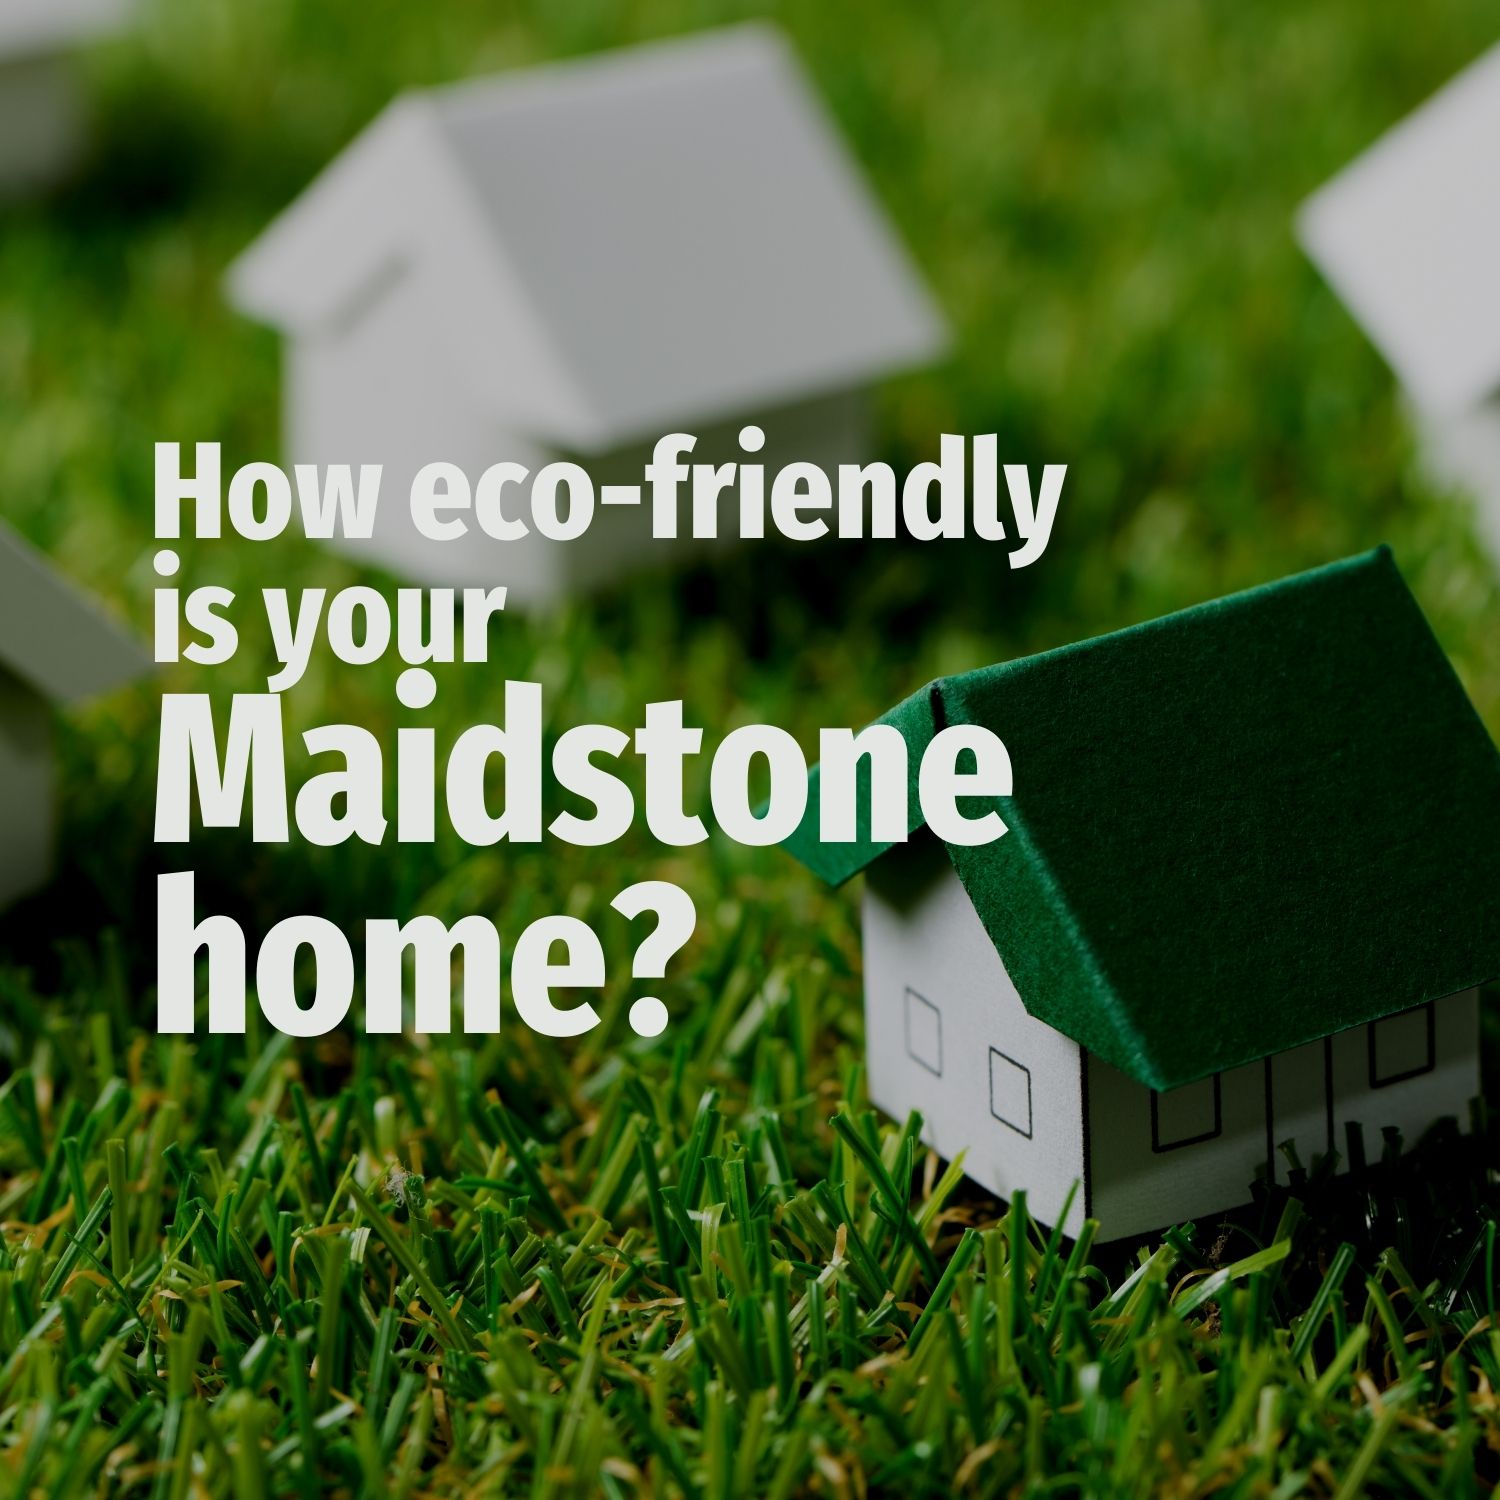 How Eco-friendly are Maidstone Homes?